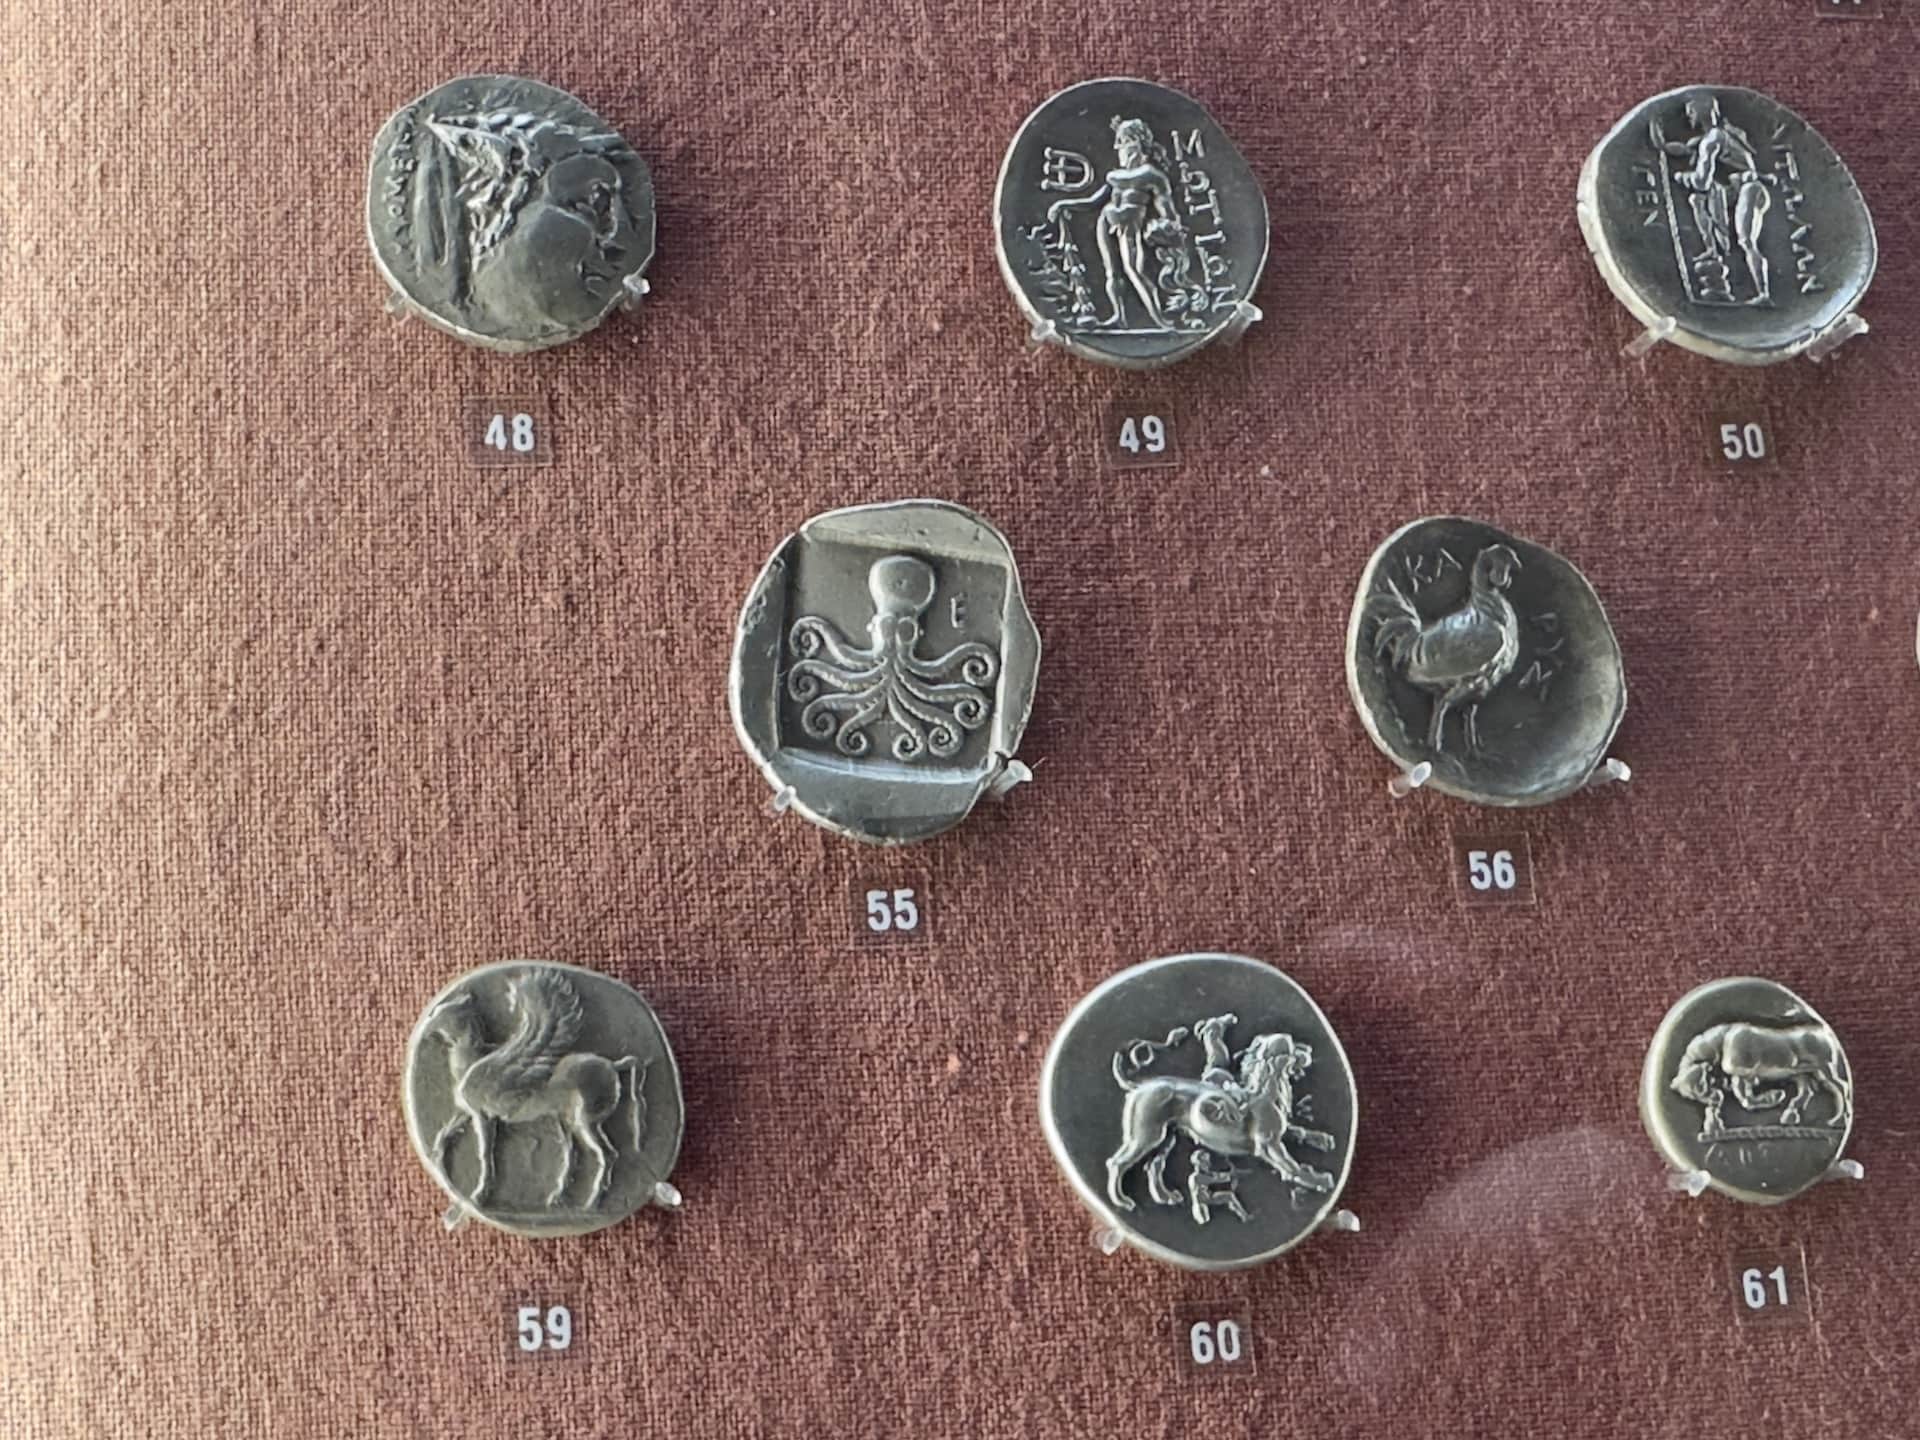 Coins featuring animals including an octopus at the Numismatic Museum in Athens, Greece